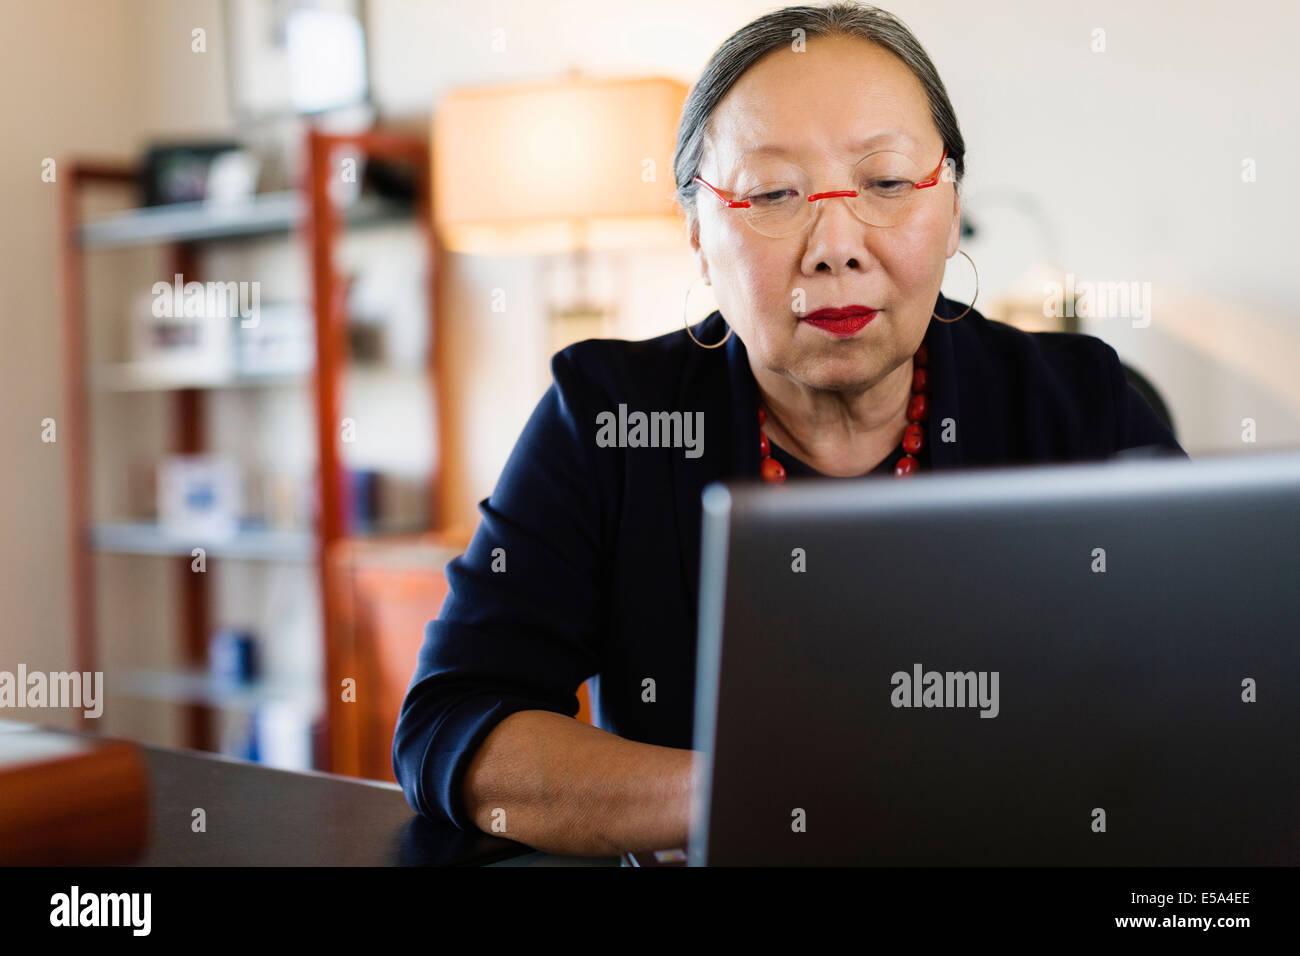 Japanese businesswoman working at desk Banque D'Images